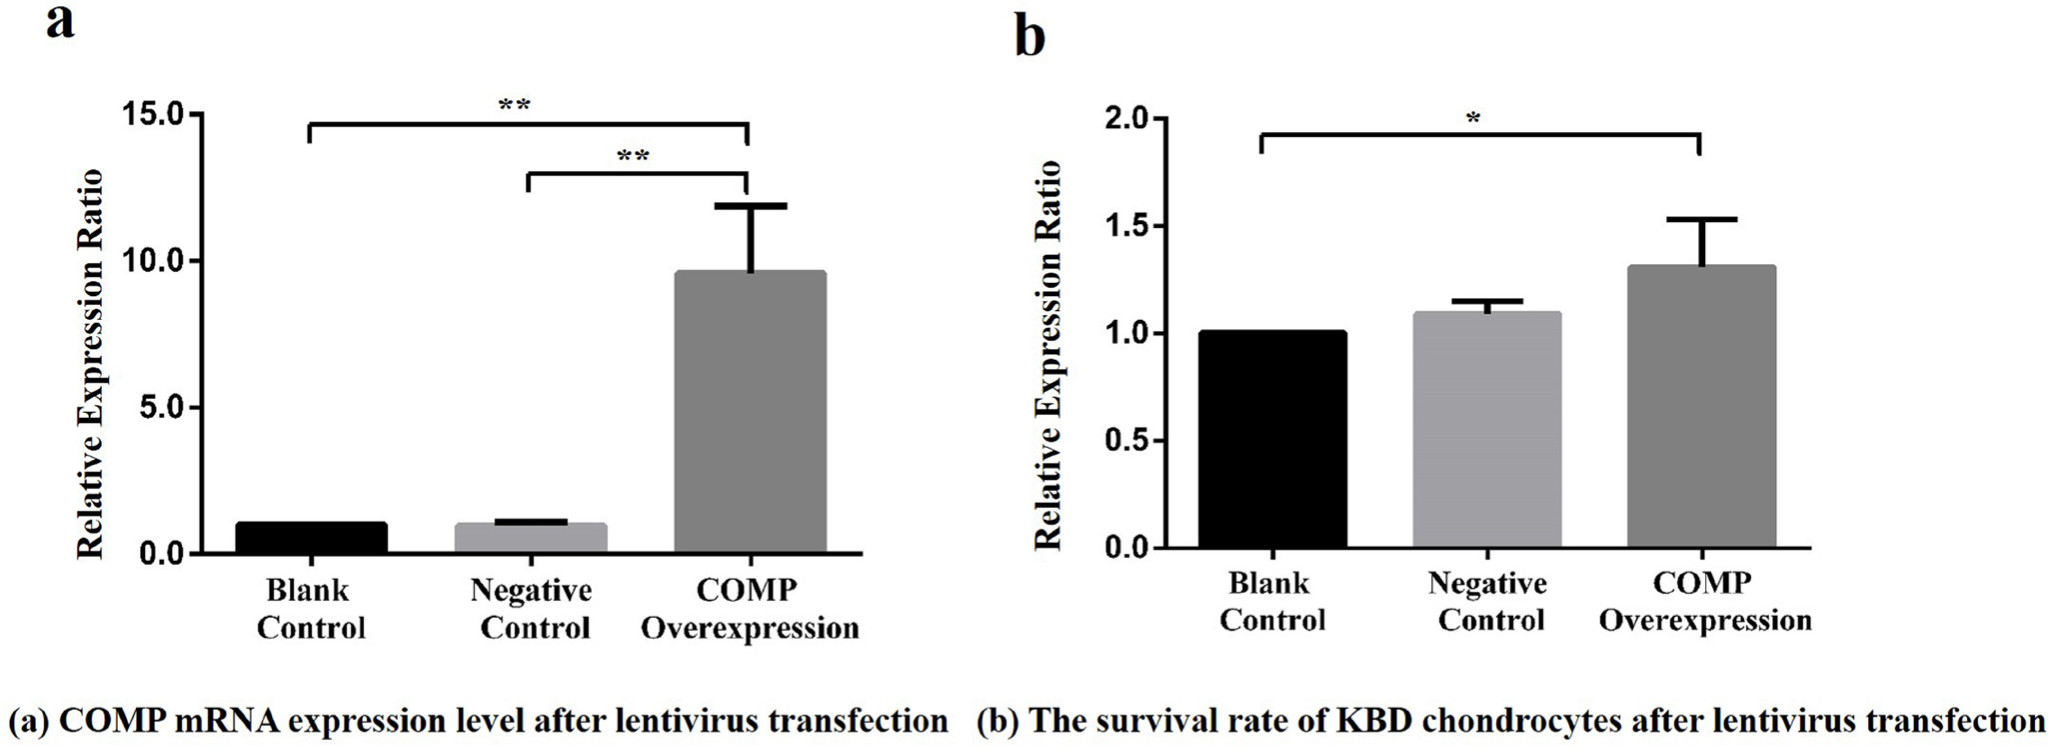 Fig. 3 
            a) Relative expression ratio of cartilage oligosaccharide matrix protein (COMP) overexpressing lentivirus in articular chondrocytes among the blank control, negative control, and COMP overexpression groups. Compared with the COMP overexpression group, the mean COMP expression levels in the blank control group and negative control group were reduced significantly (7.25, SD 4.69 and 10.12, SD 2.86, respectively; all **p < 0.001, Dunnett-t test). b) Effect of COMP overexpression of lentivirus on the activity of articular chondrocytes in Kashin-Beck disease (KBD) among the blank control, negative control, and COMP overexpression groups. Compared with the COMP overexpression group, the mean survival rate of KBD chondrocytes in the blank control group was reduced (1.31, SD 0.22; *p < 0.05, Dunnett-t test).
          